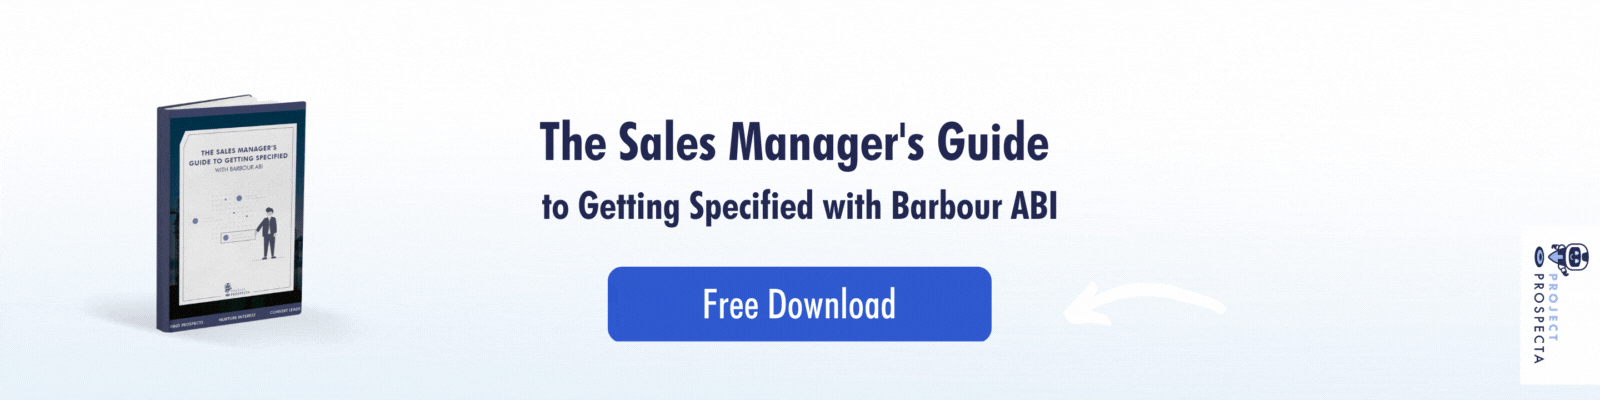 Project-Prospecta-Sales-Managers-Guide-eBook